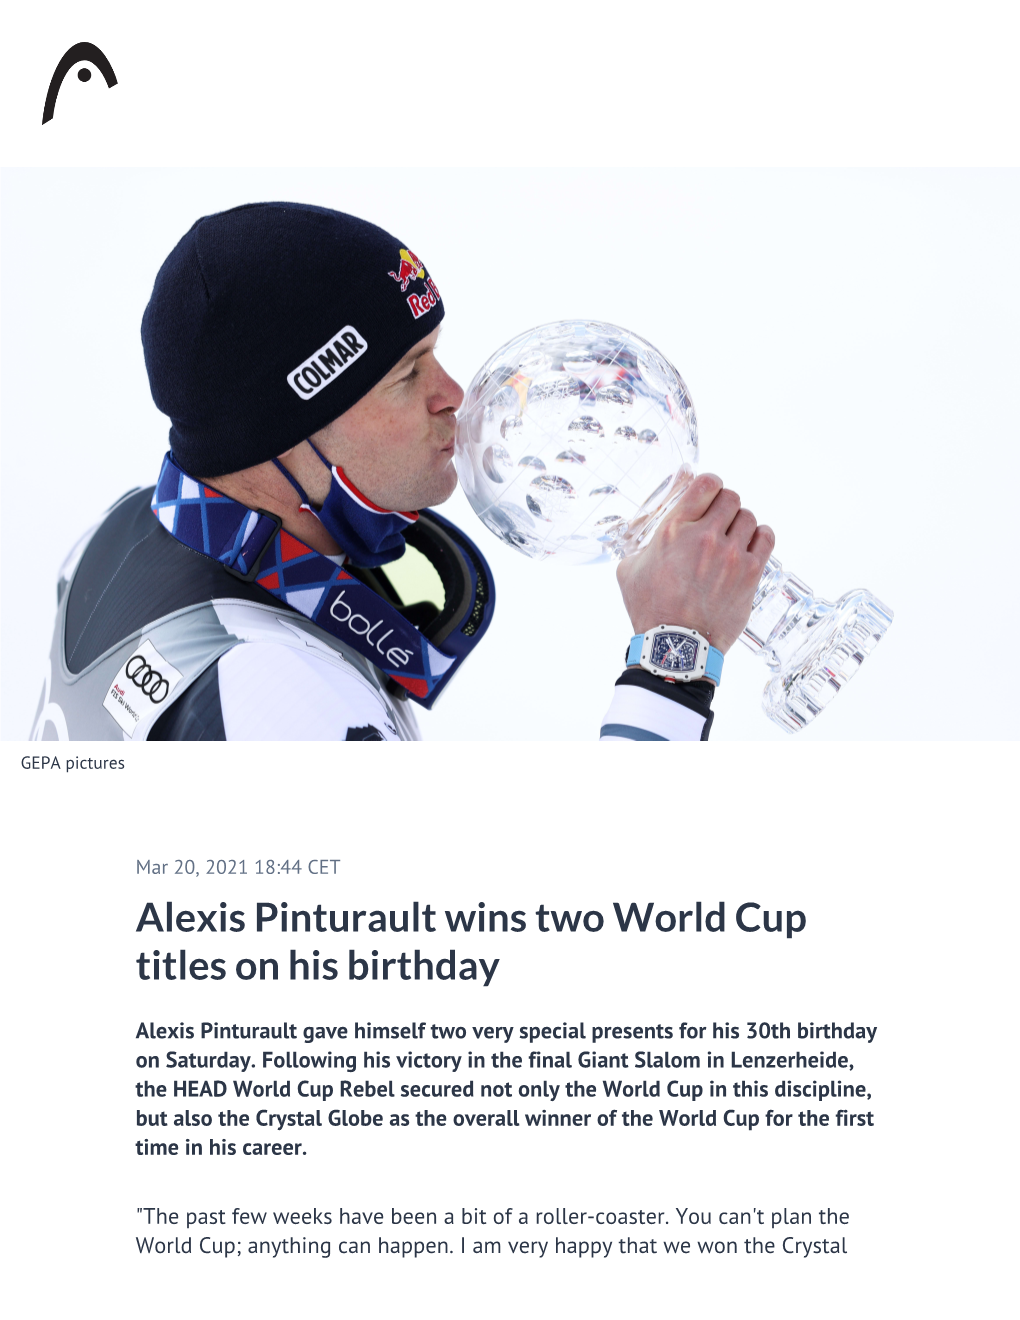 Alexis Pinturault Wins Two World Cup Titles on His Birthday